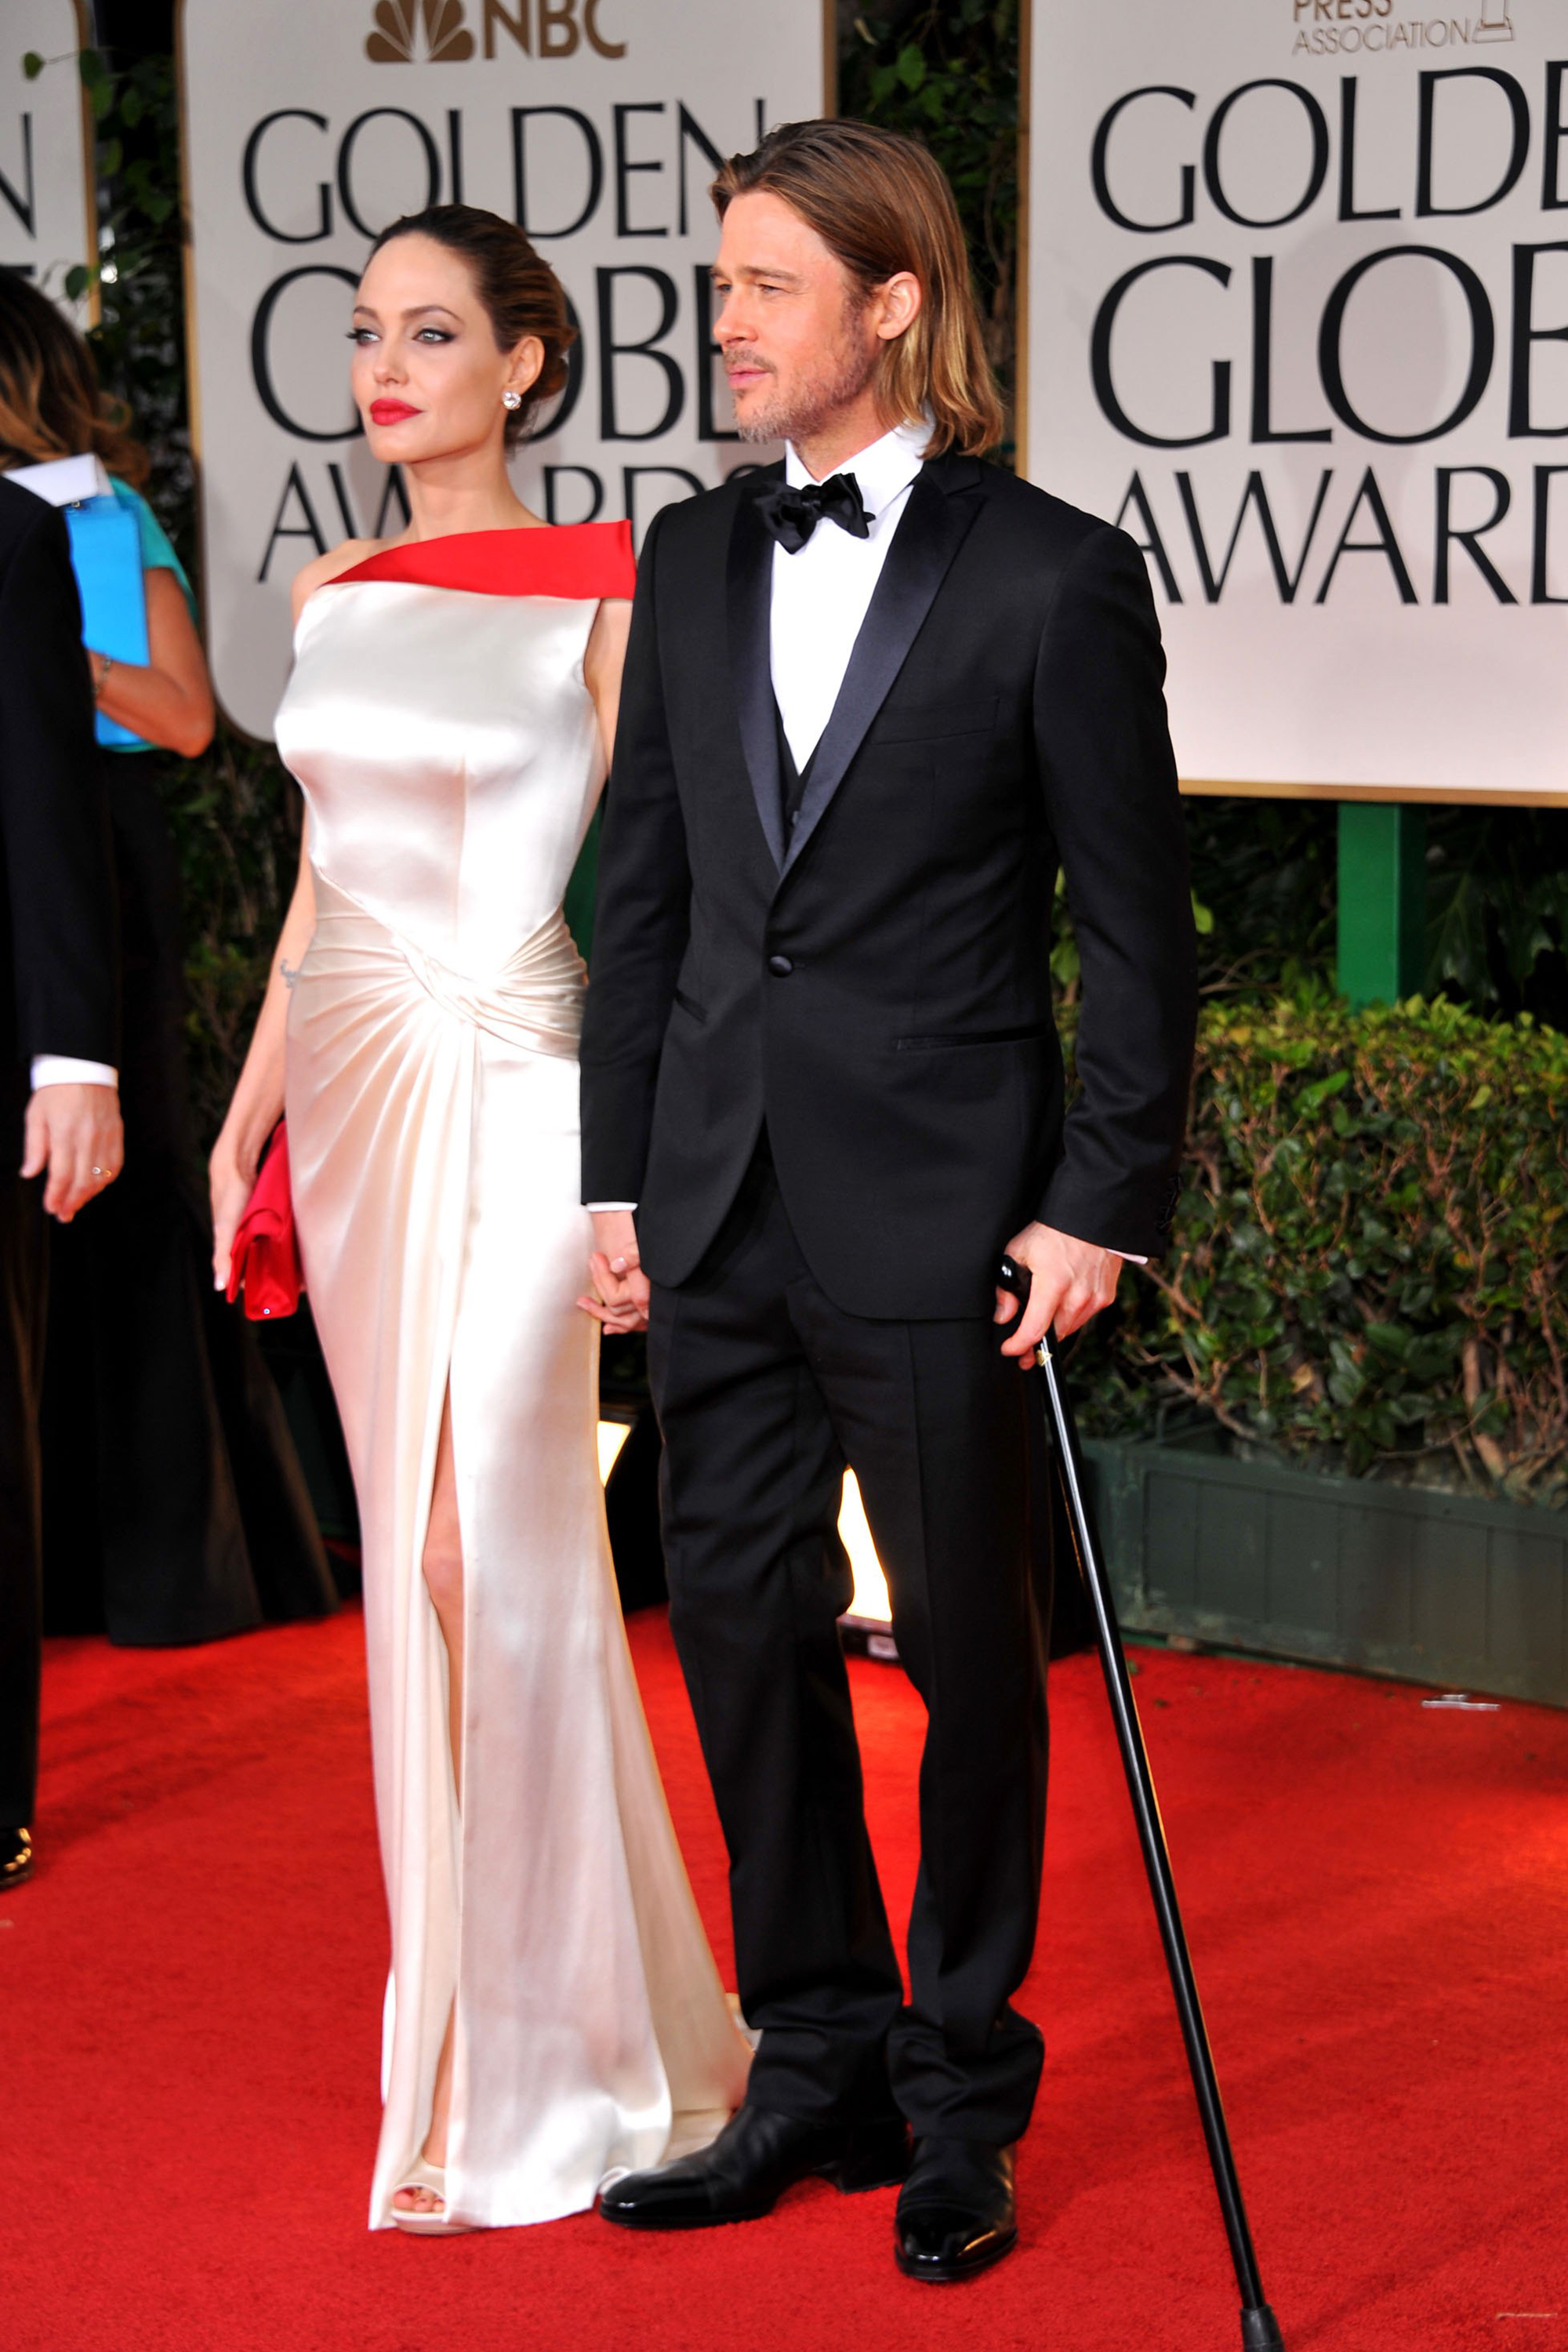 Angelina Jolie and Brad Pitt arrive at the 69th Annual Golden Globe Awards held on Jan. 15, 2012 in Beverly Hills, Calif.